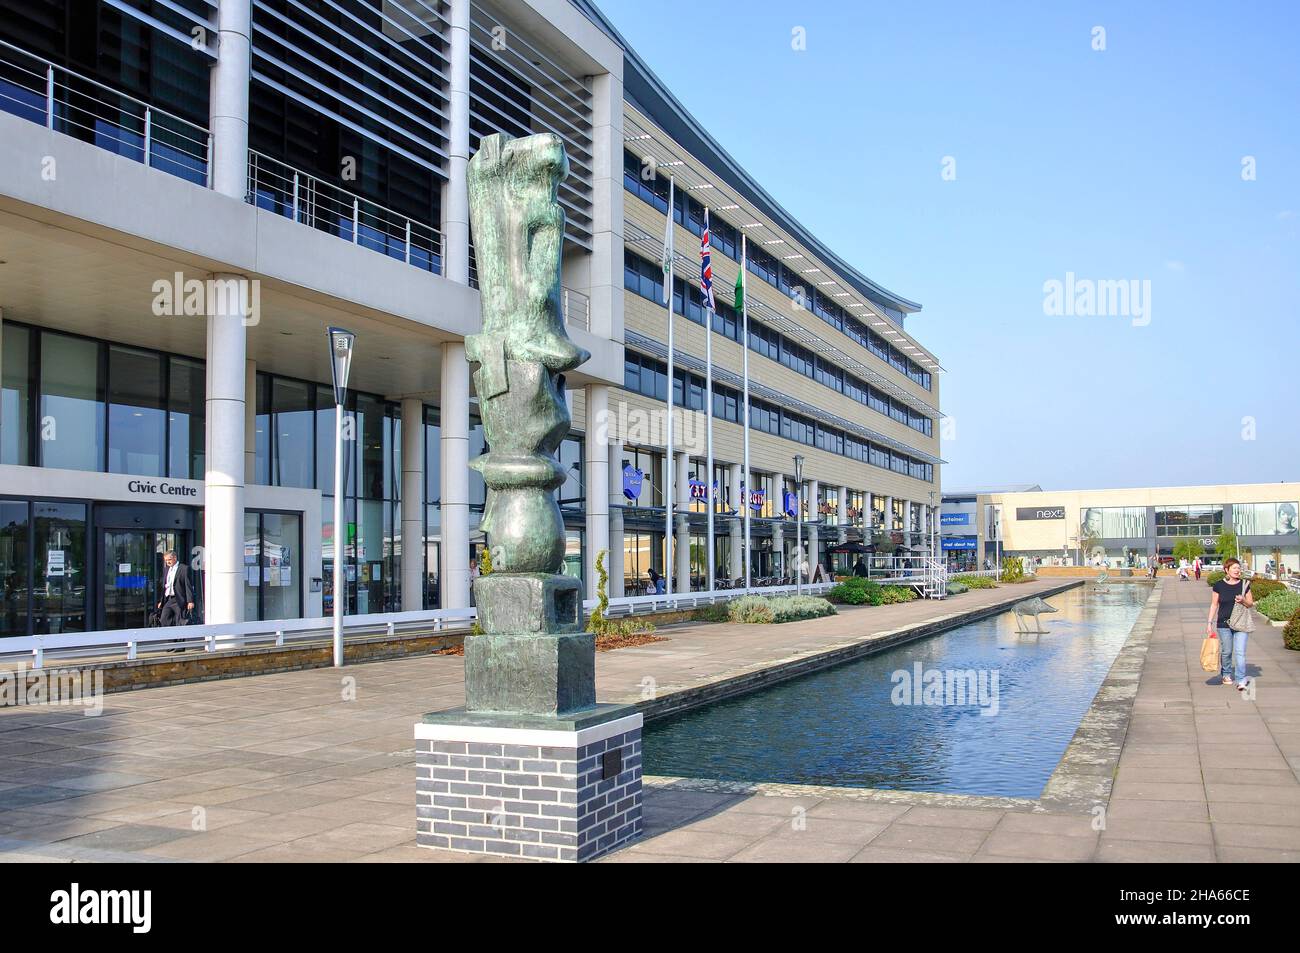 Civic Centre, The Water Gardens, College Square, Harlow, Essex, England, United Kingdom Stock Photo